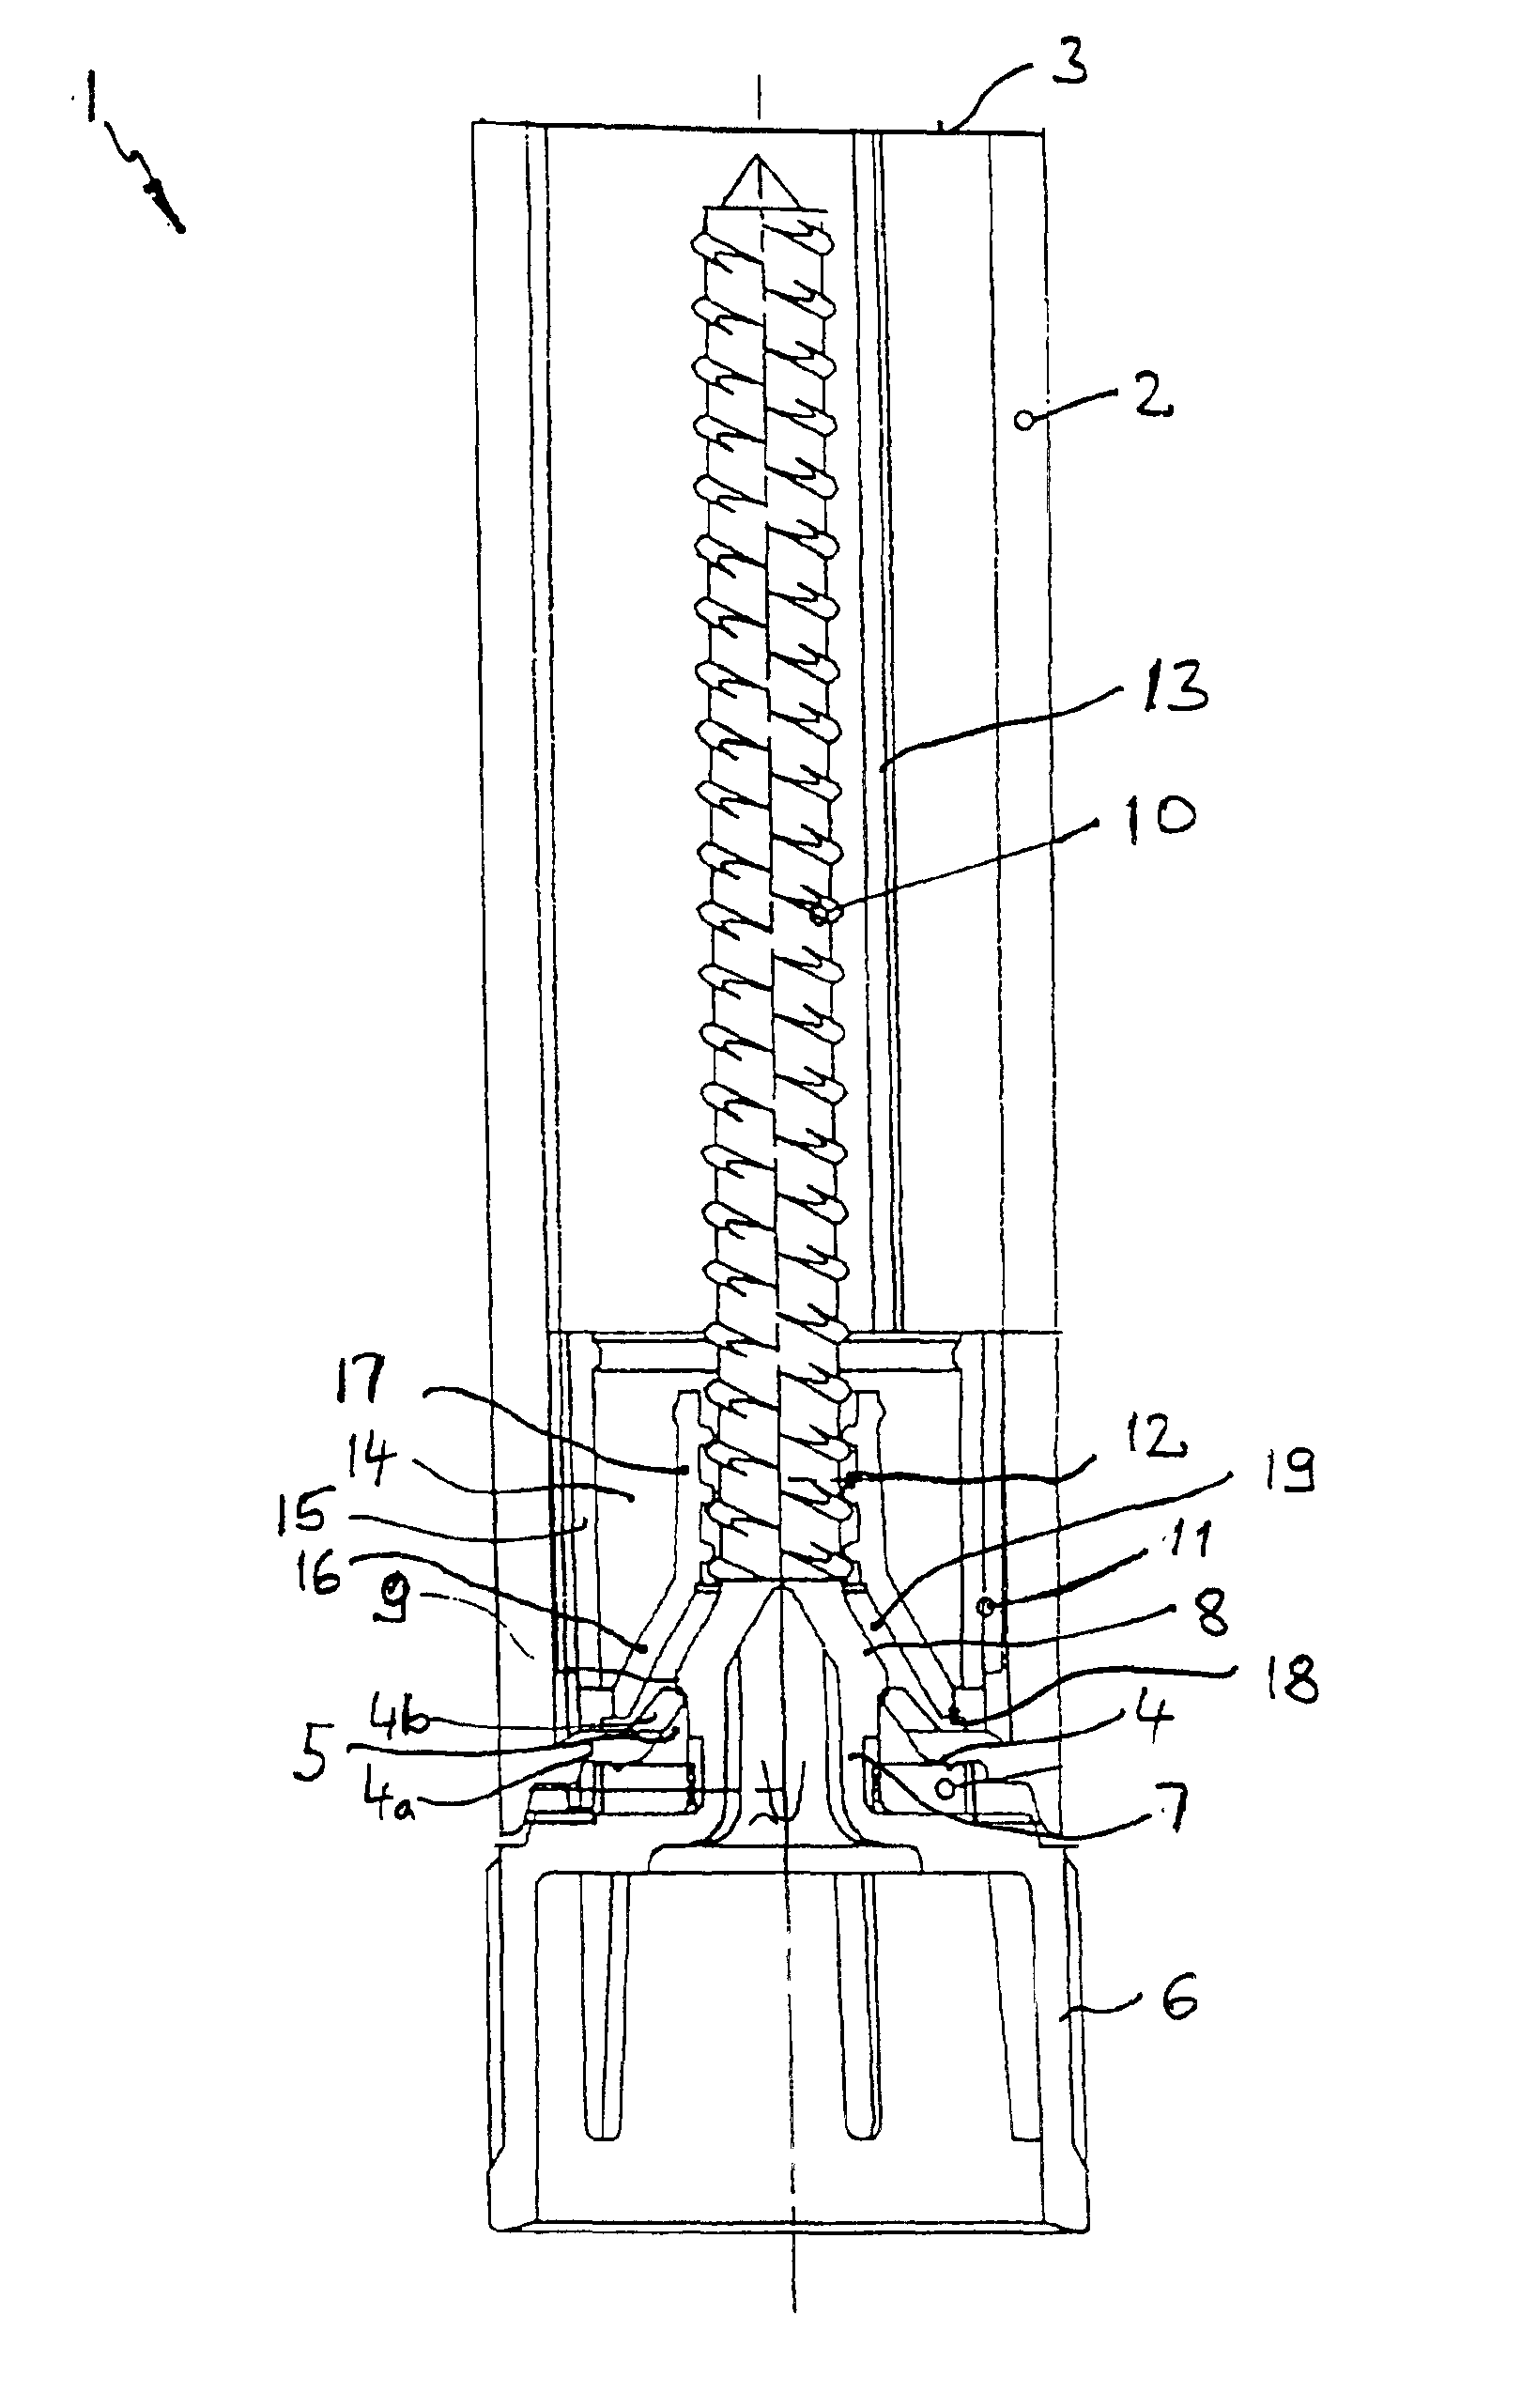 Device for receiving and dispensing a coatable material